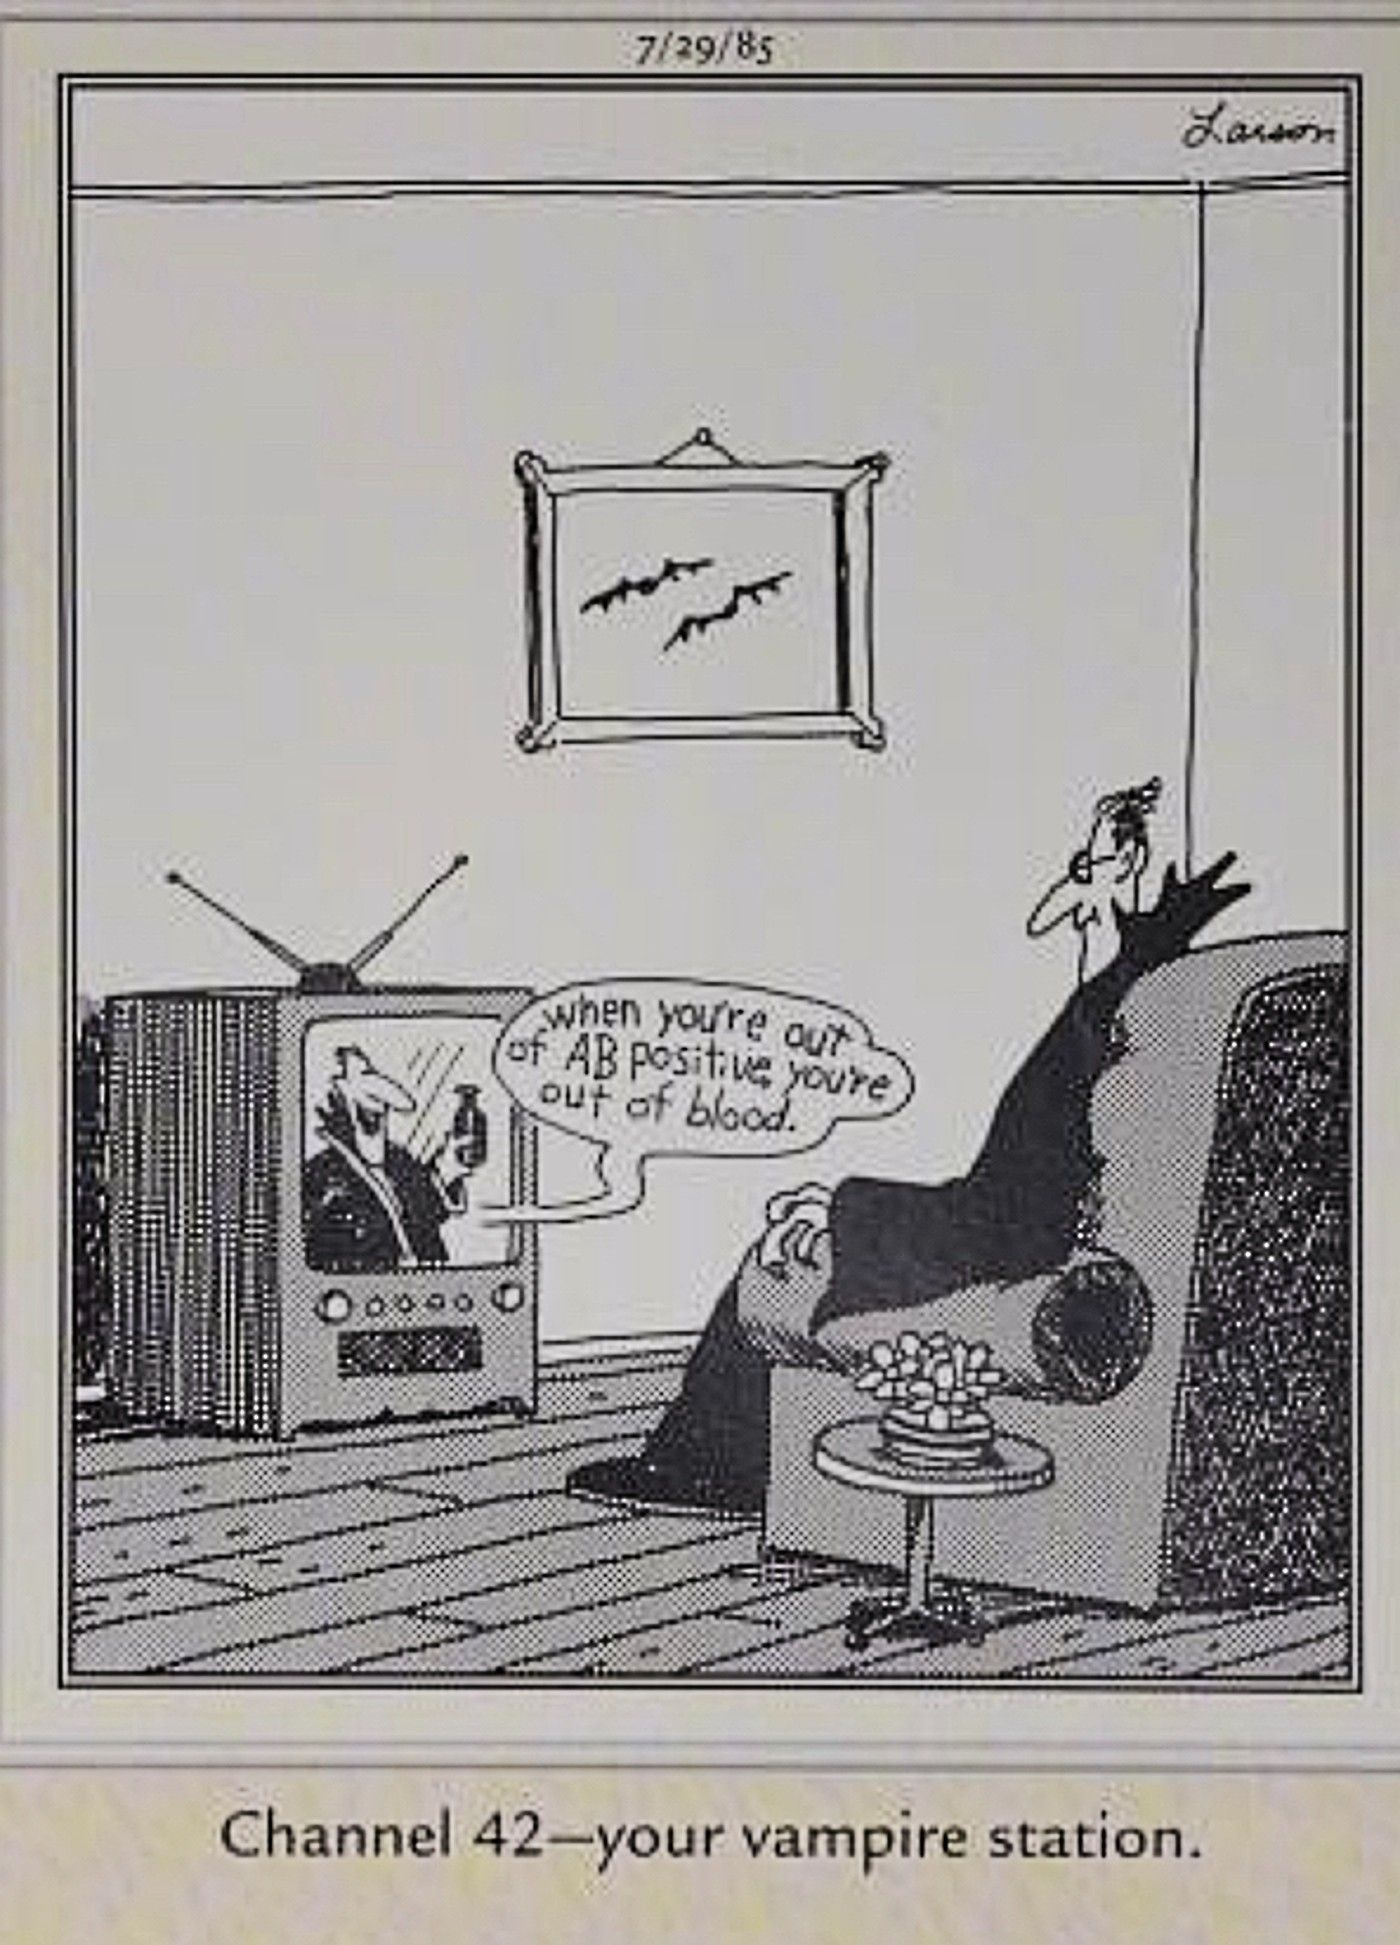 Far Side, Channel 42 your vampire station